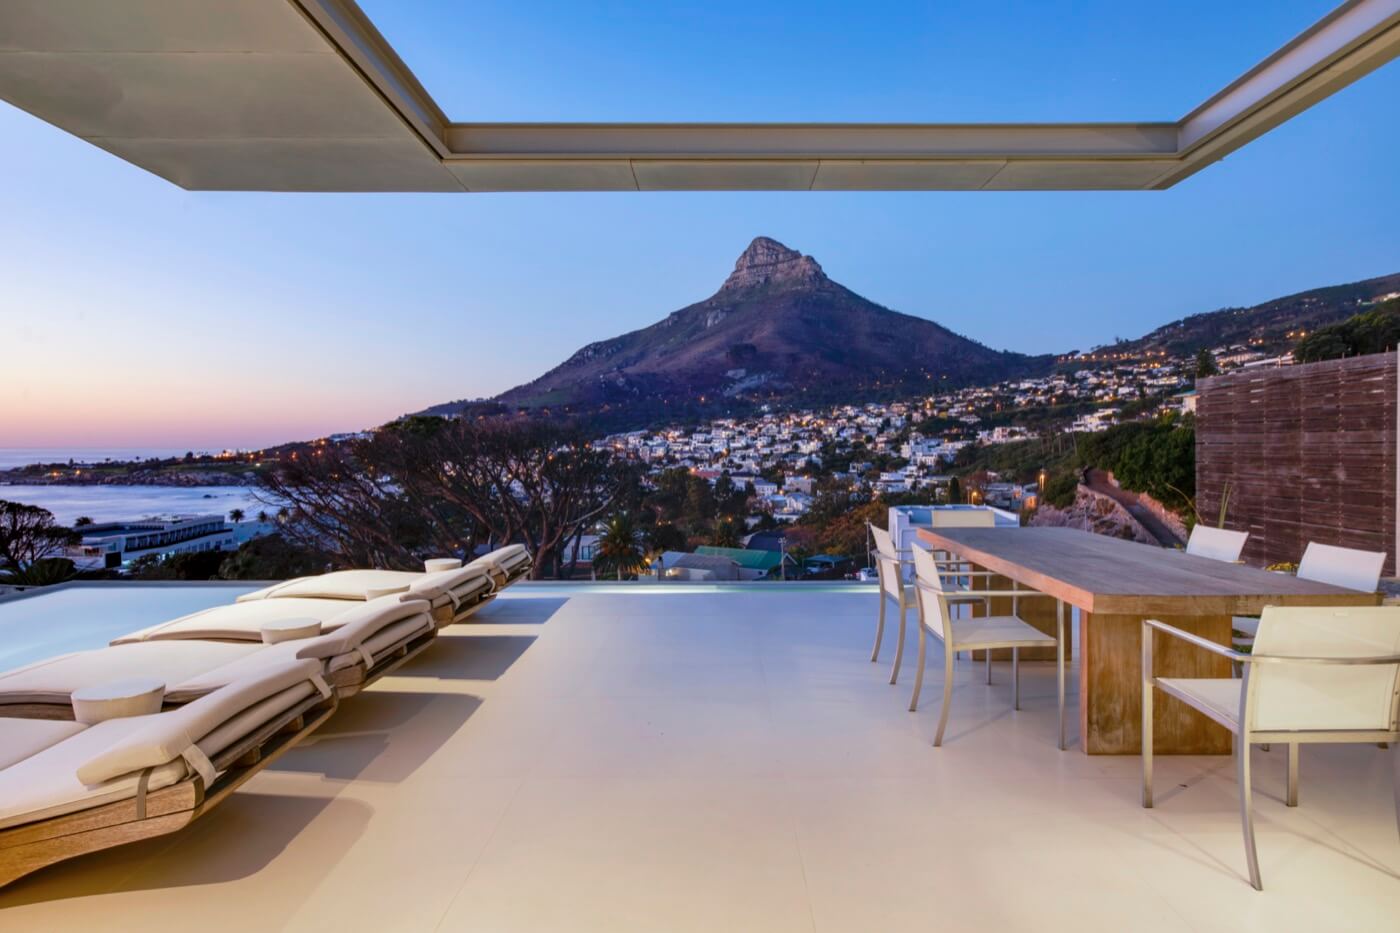 Photo 11 of The Crescent accommodation in Camps Bay, Cape Town with 6 bedrooms and 6.5 bathrooms